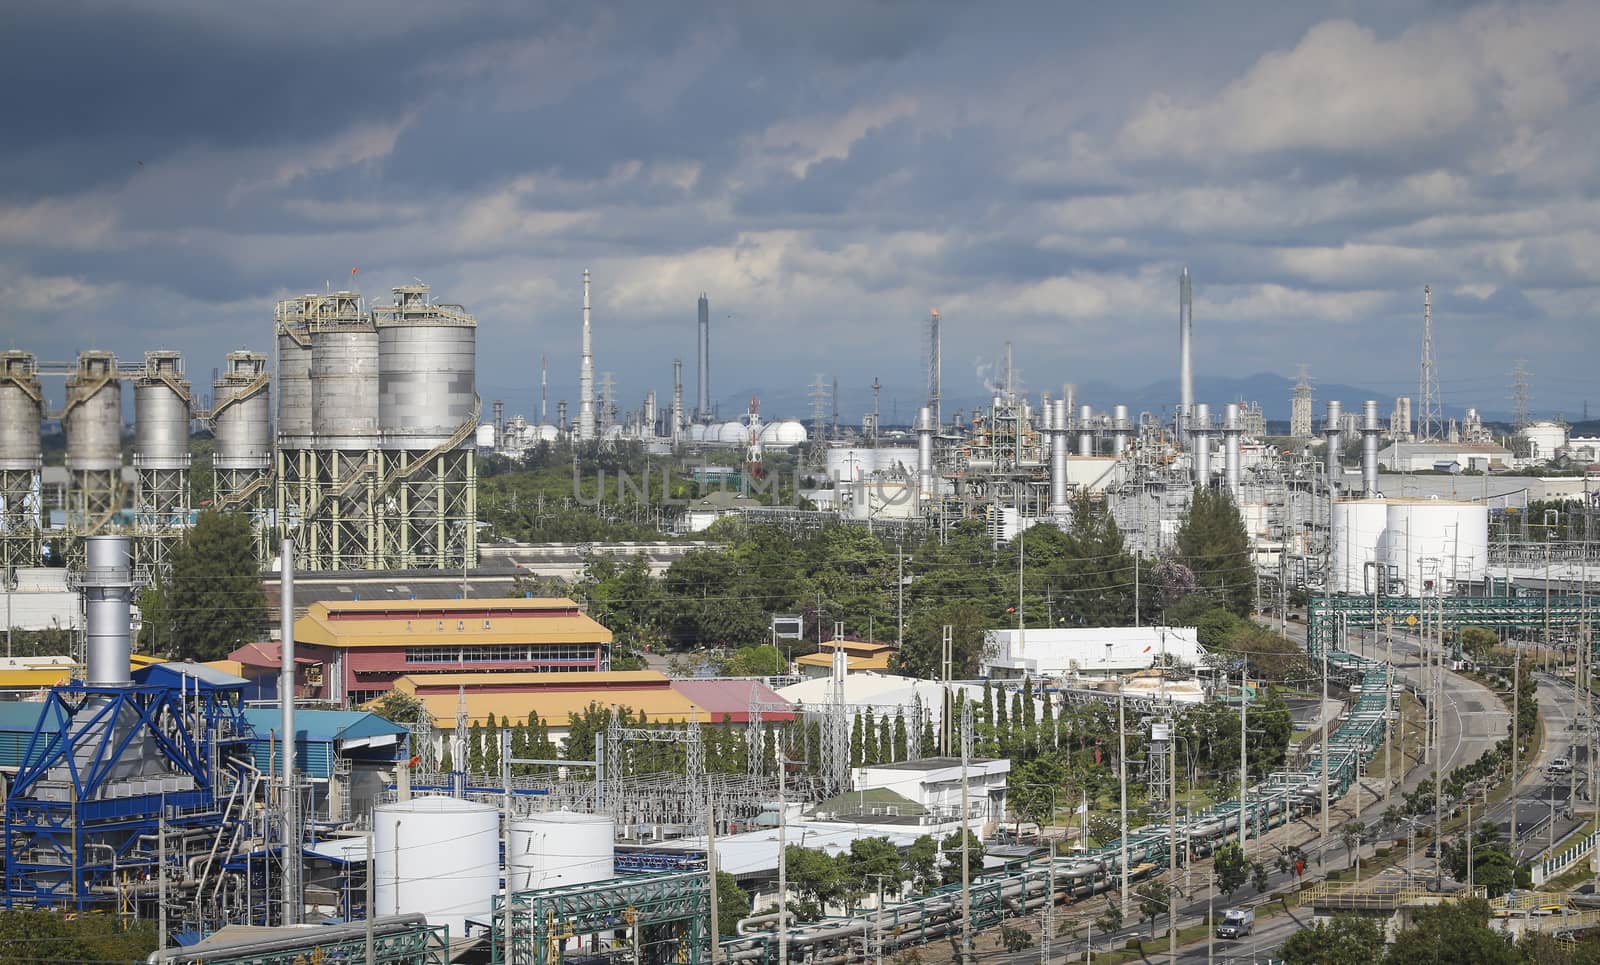 View of refinery industrial factory with cioud sky